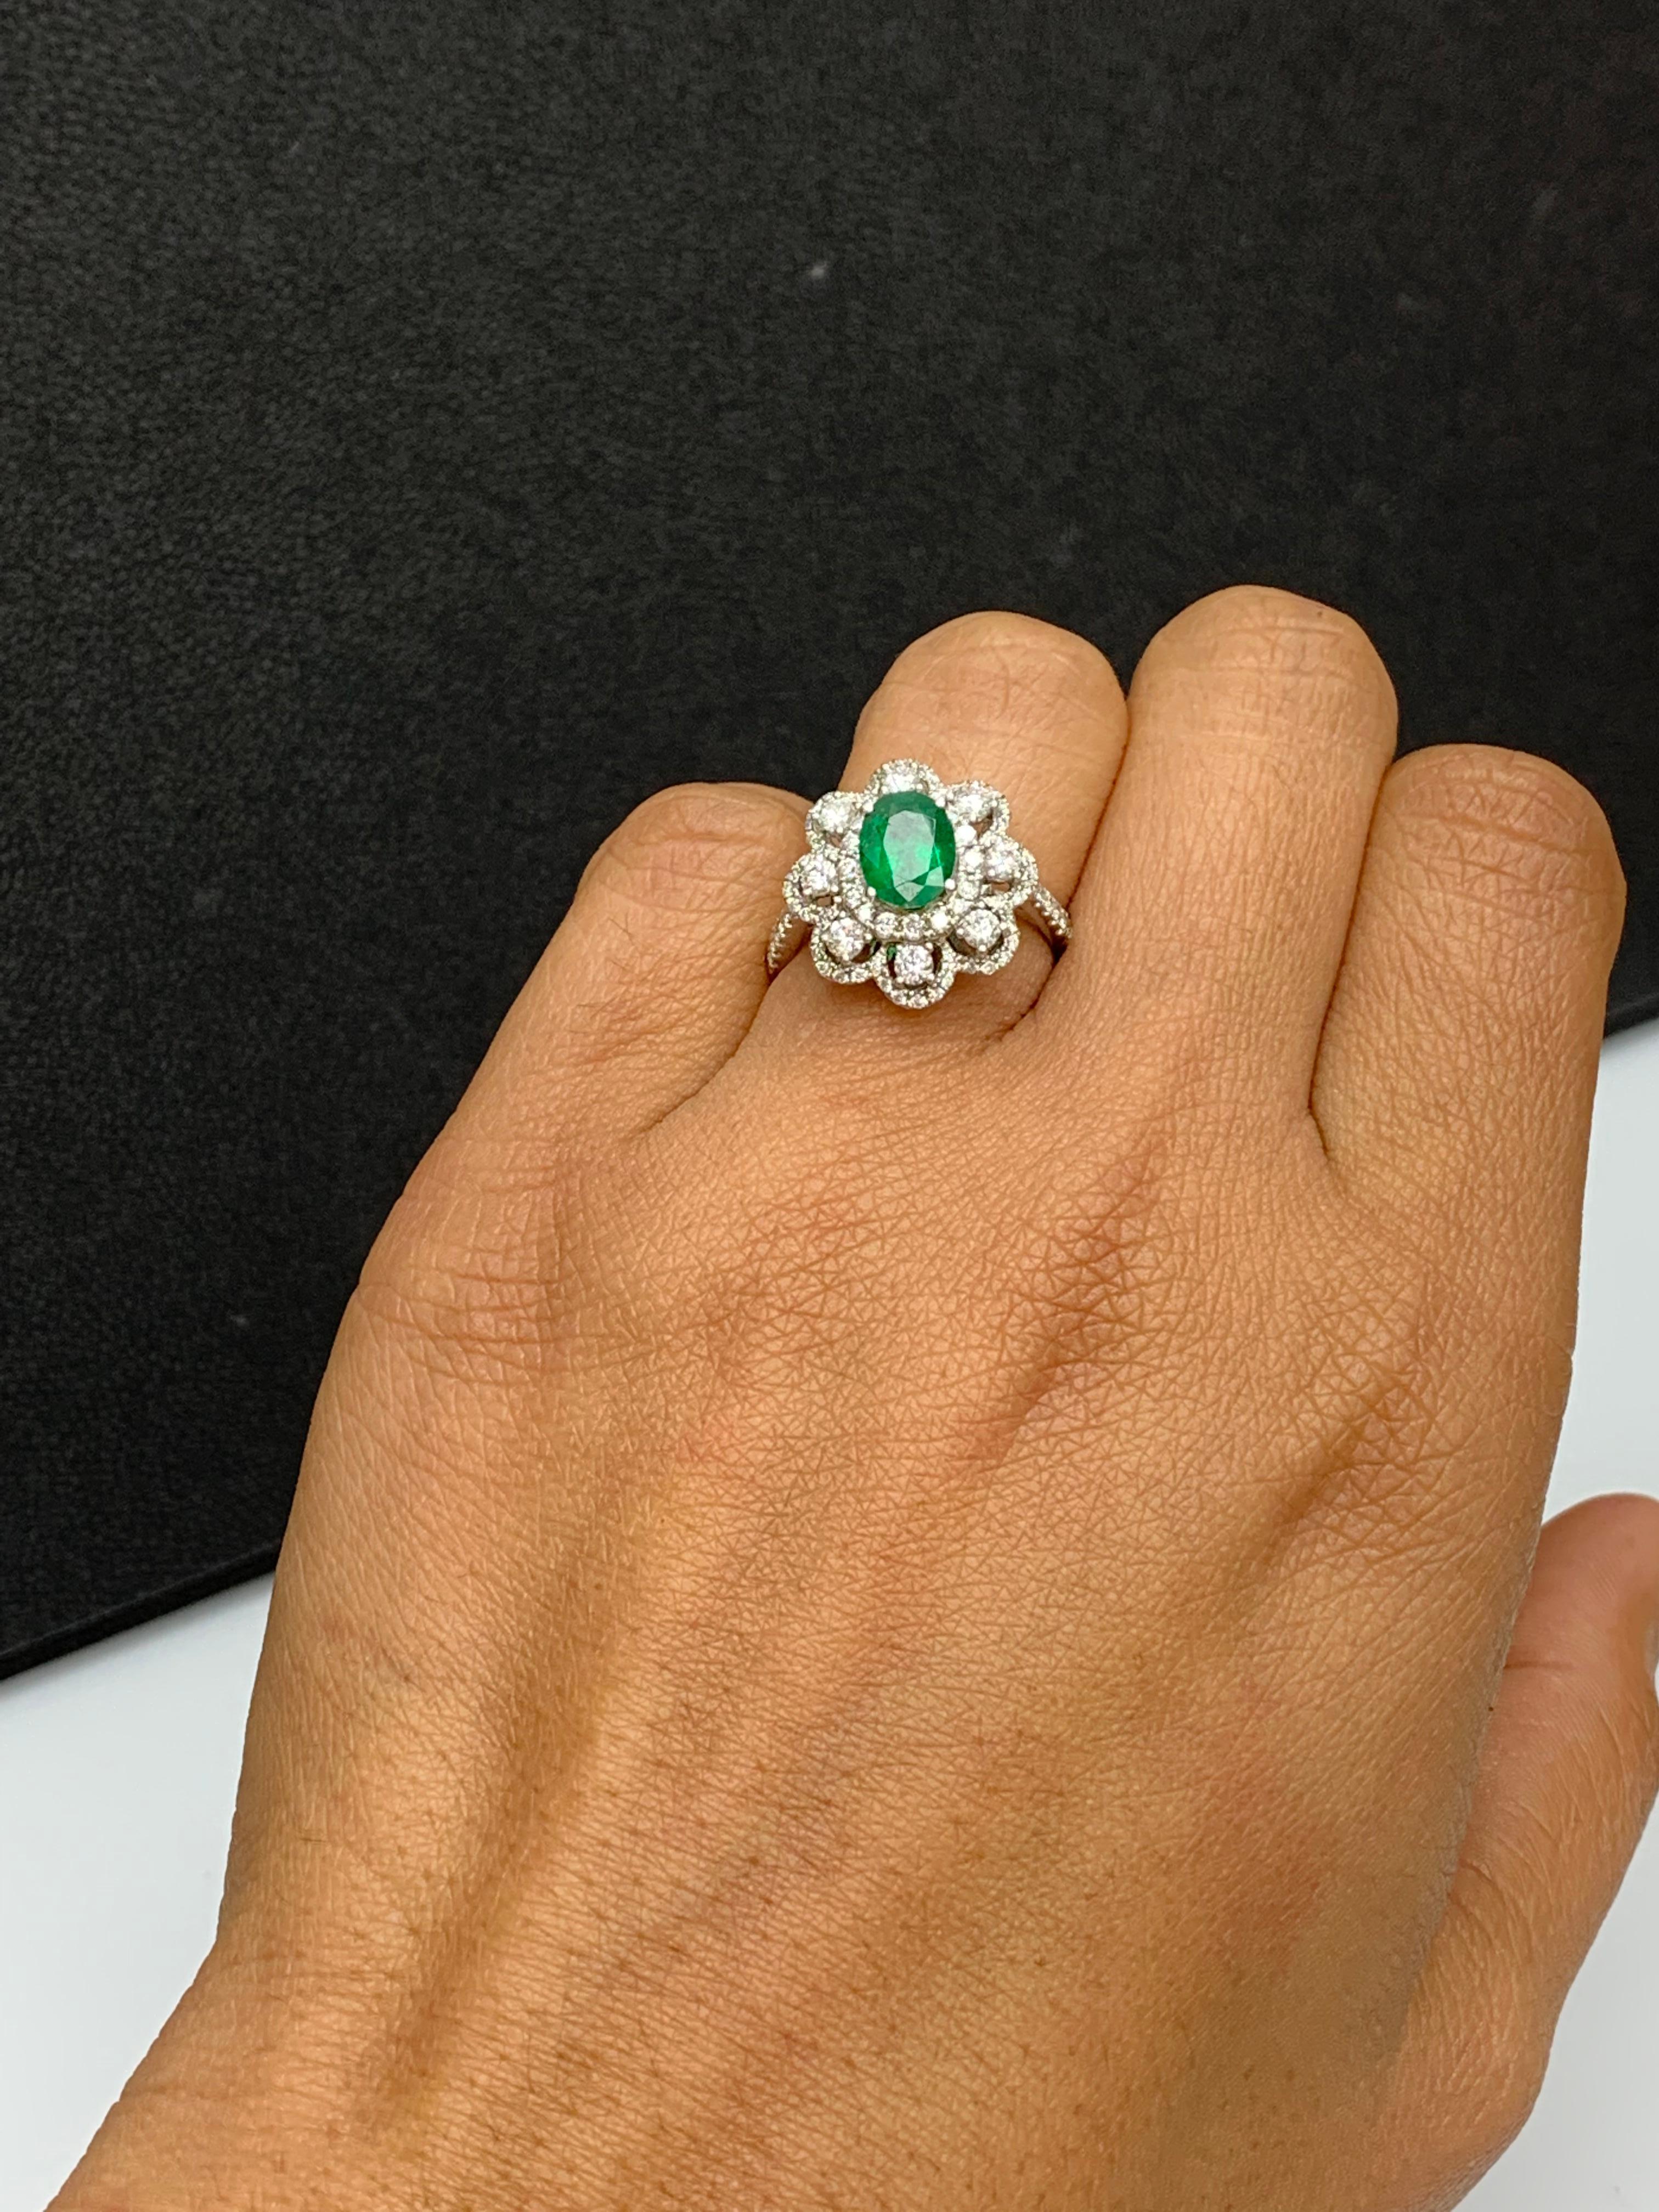 Oval Cut 1.01 Carat Oval Emerald and Diamond Cocktail Flower Ring in 18K White Gold For Sale